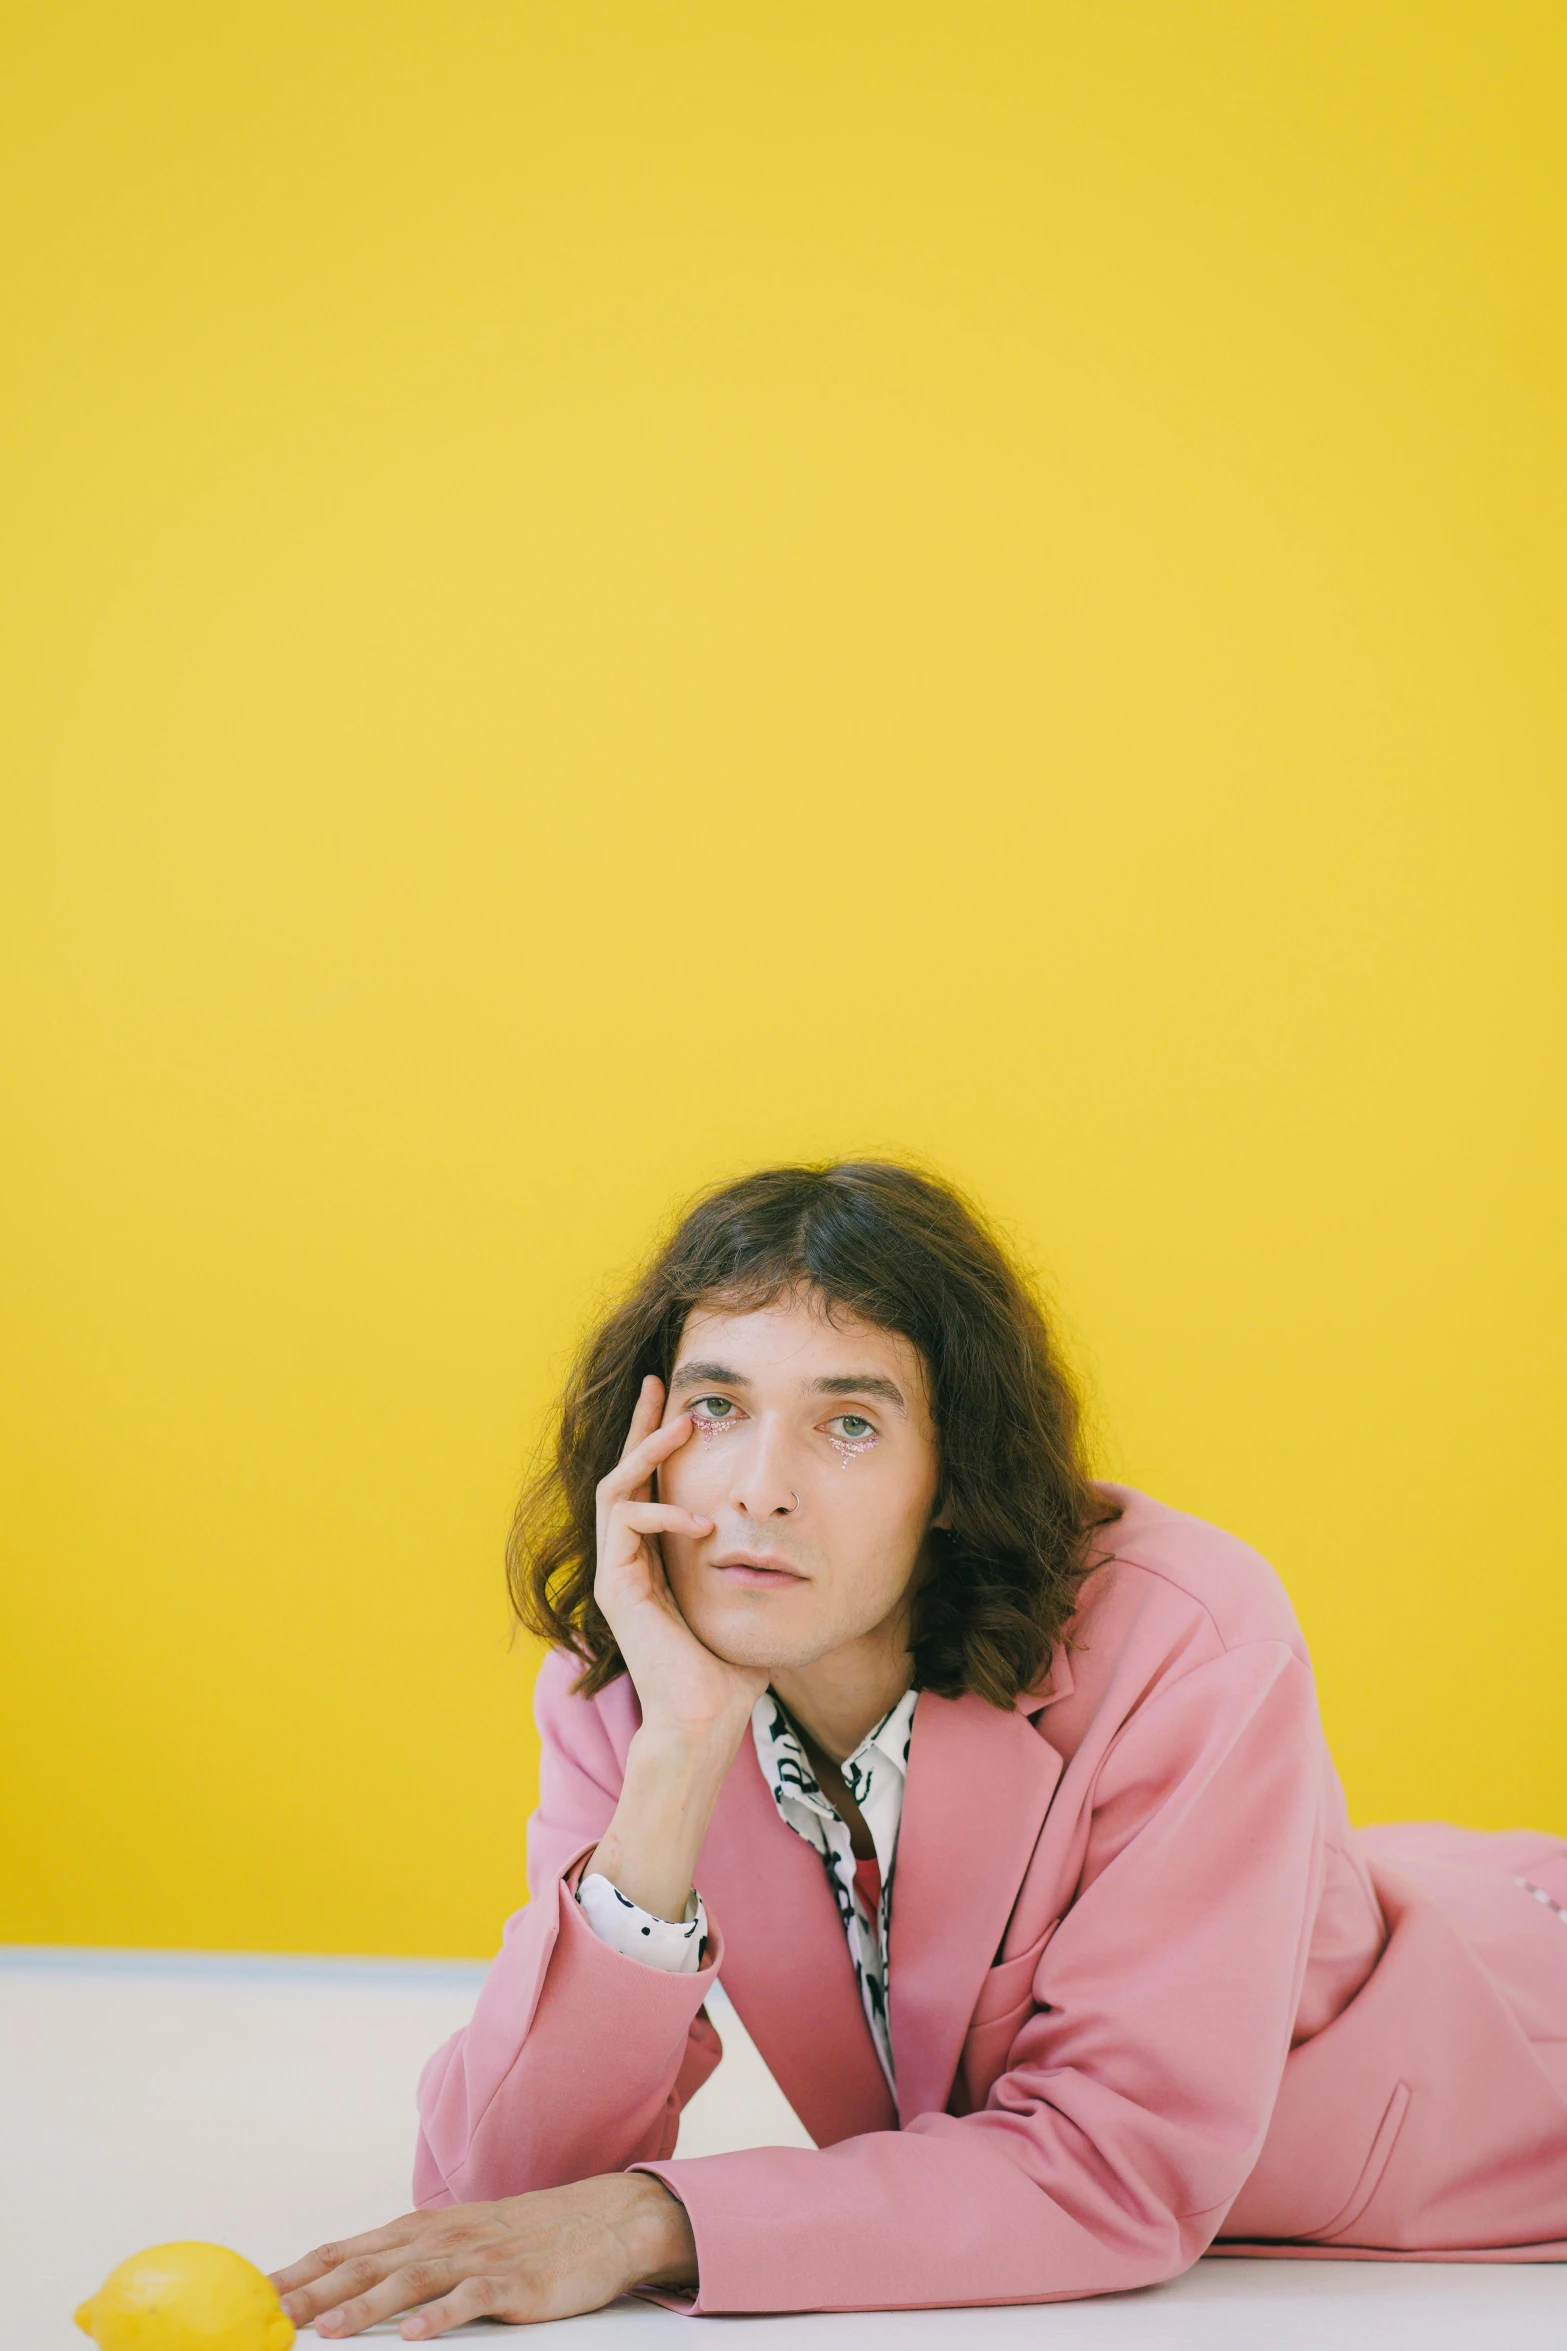 a woman laying on the floor next to a lemon, an album cover, wearing a light - pink suit, robert sheehan, matt mute colour background, photographed on colour film